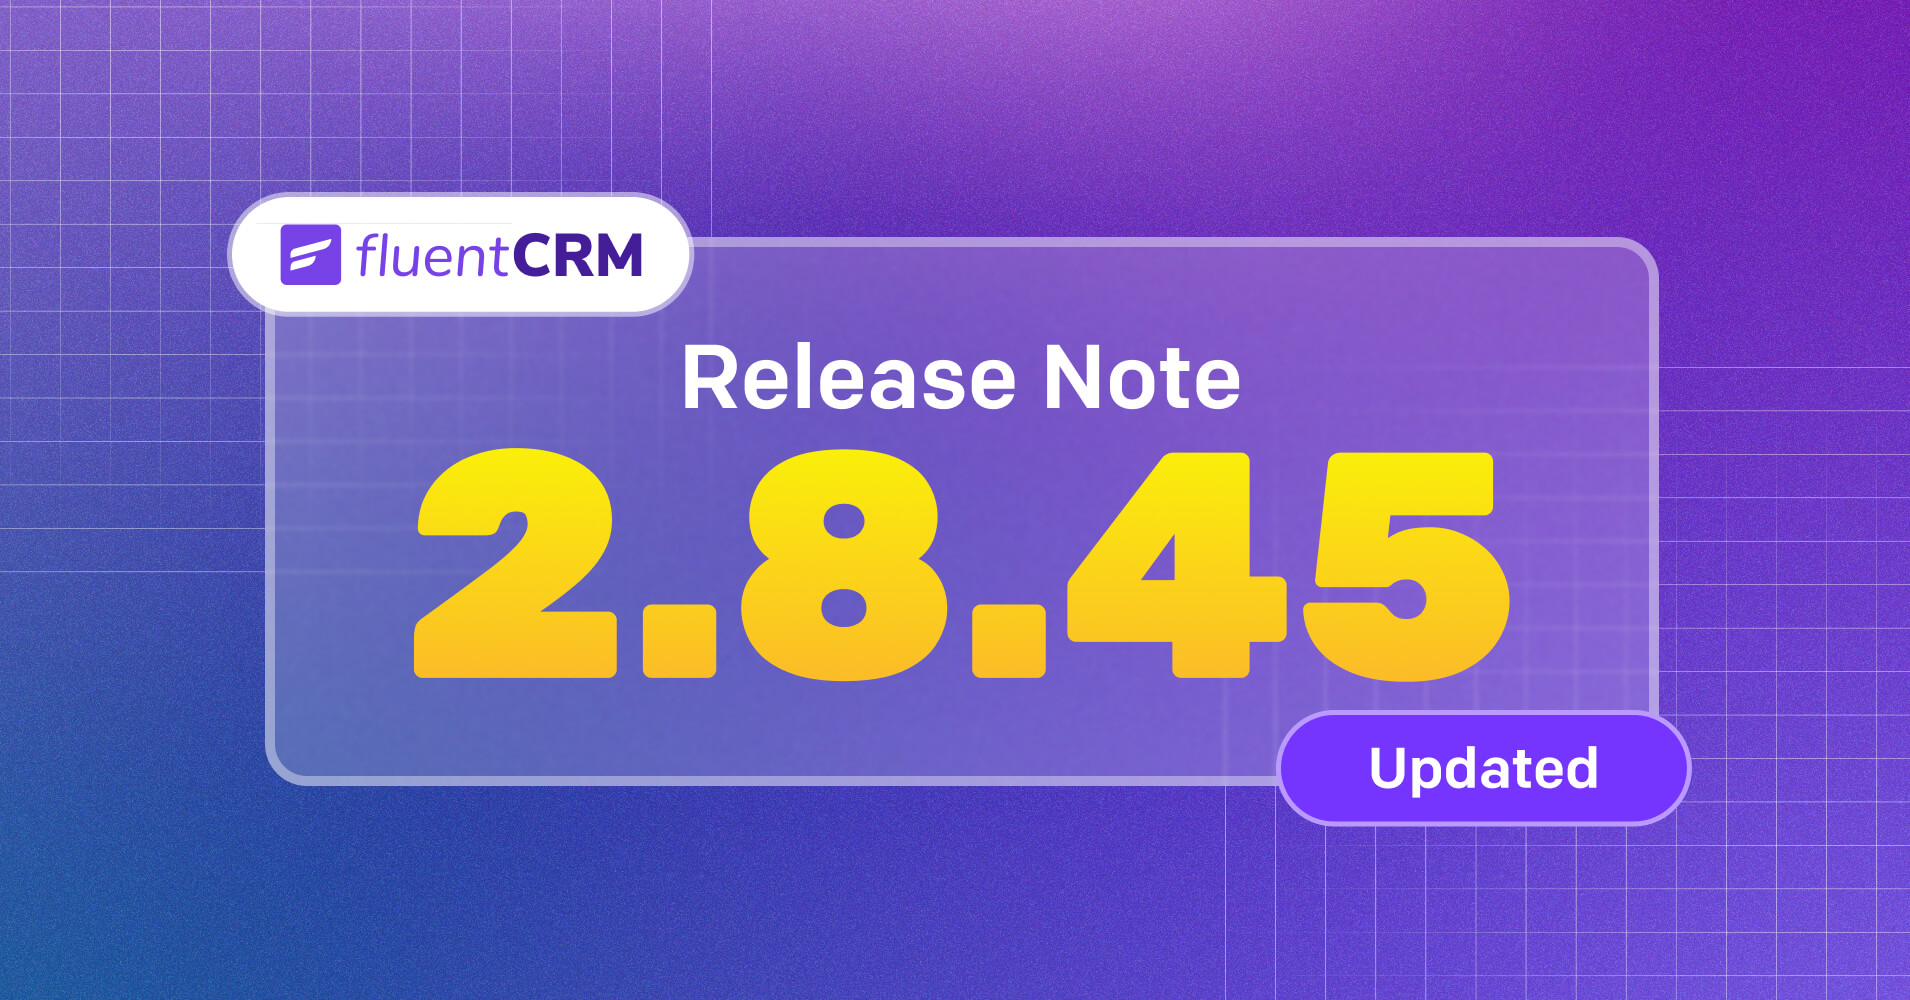 FluentCRM 2.8.45: Filter by WP User Role, Boost WooCommerce Subscription Renewals & More [Important Update]